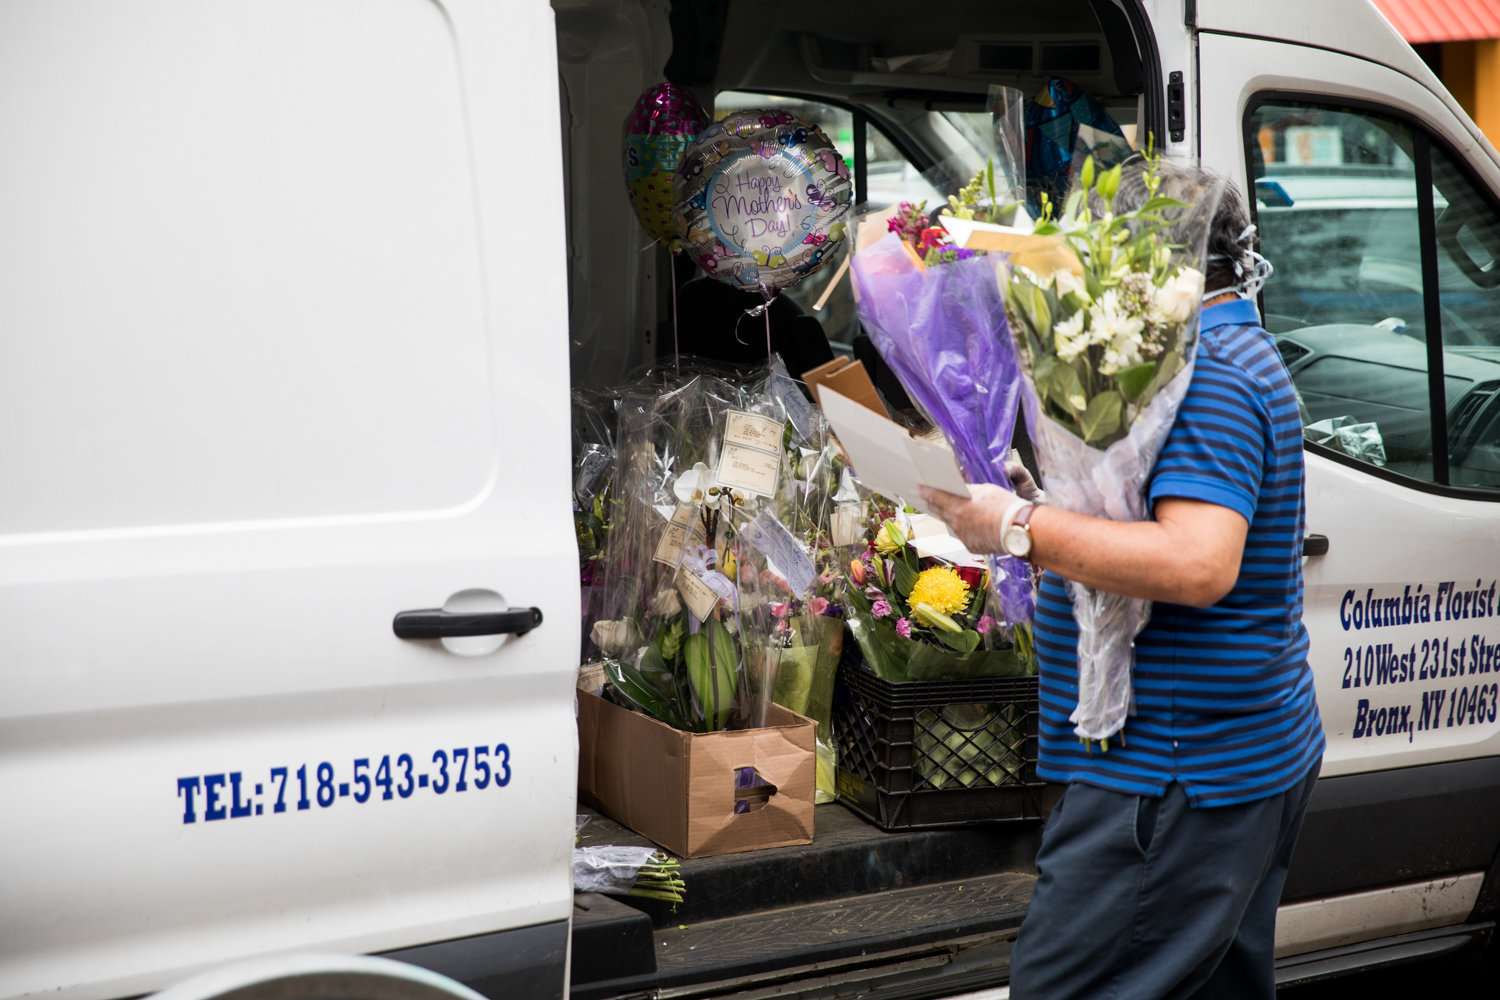 A worker carries an order of flowers to a van from Columbia Florist two days before Mother’s Day.